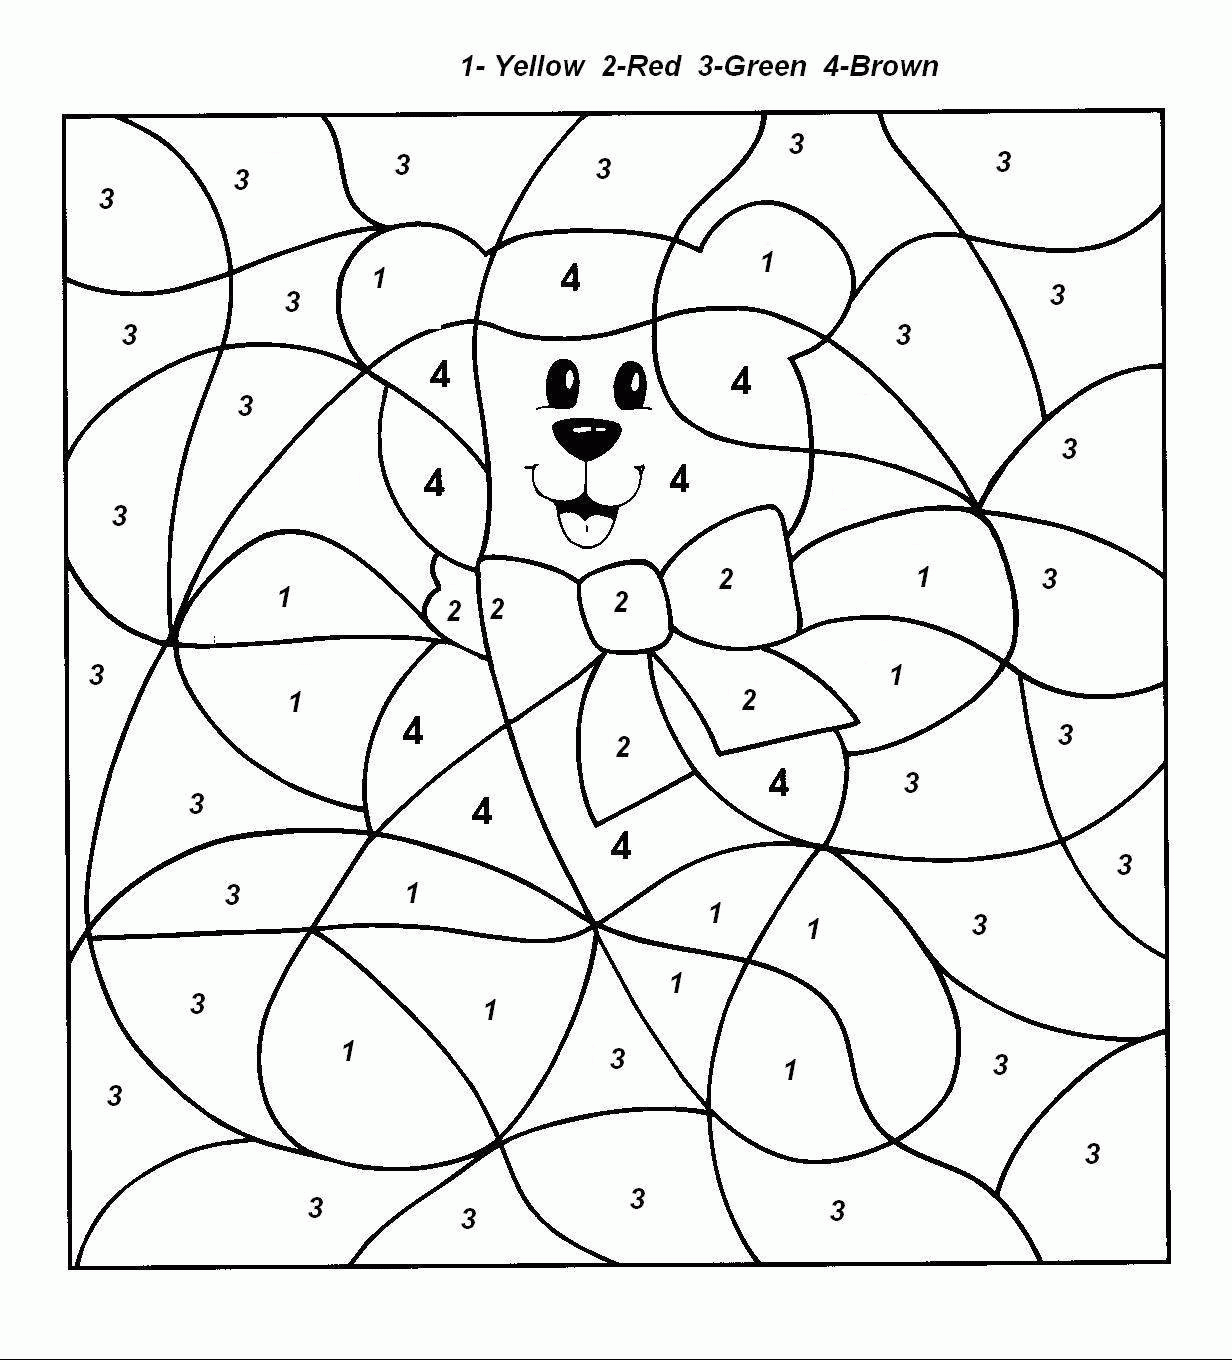 printable-number-coloring-pages-for-adults-pin-on-art-abstrait-moderne-hd-coloring-pages-for-kids